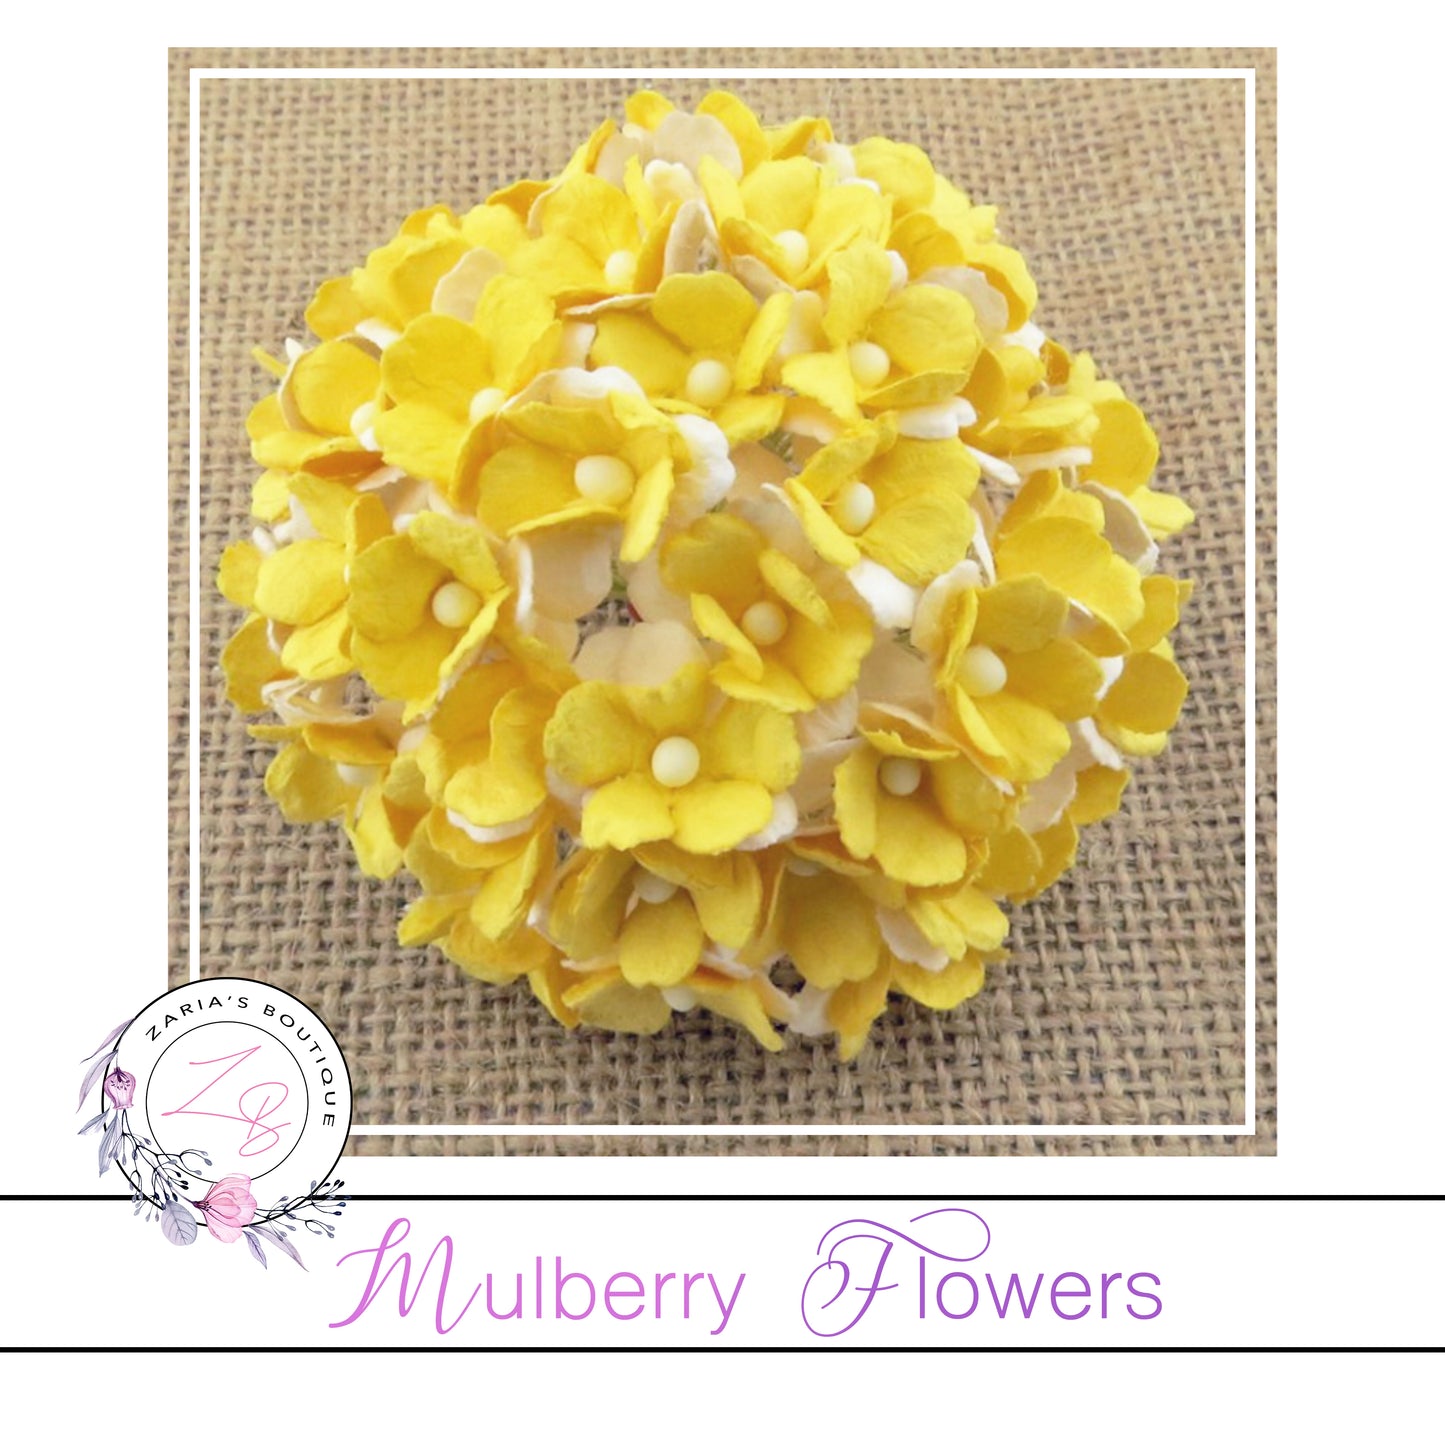 Mulberry Flowers ~ Sweetheart Blossom ~ 2-Tone Yellow ~ 15mm